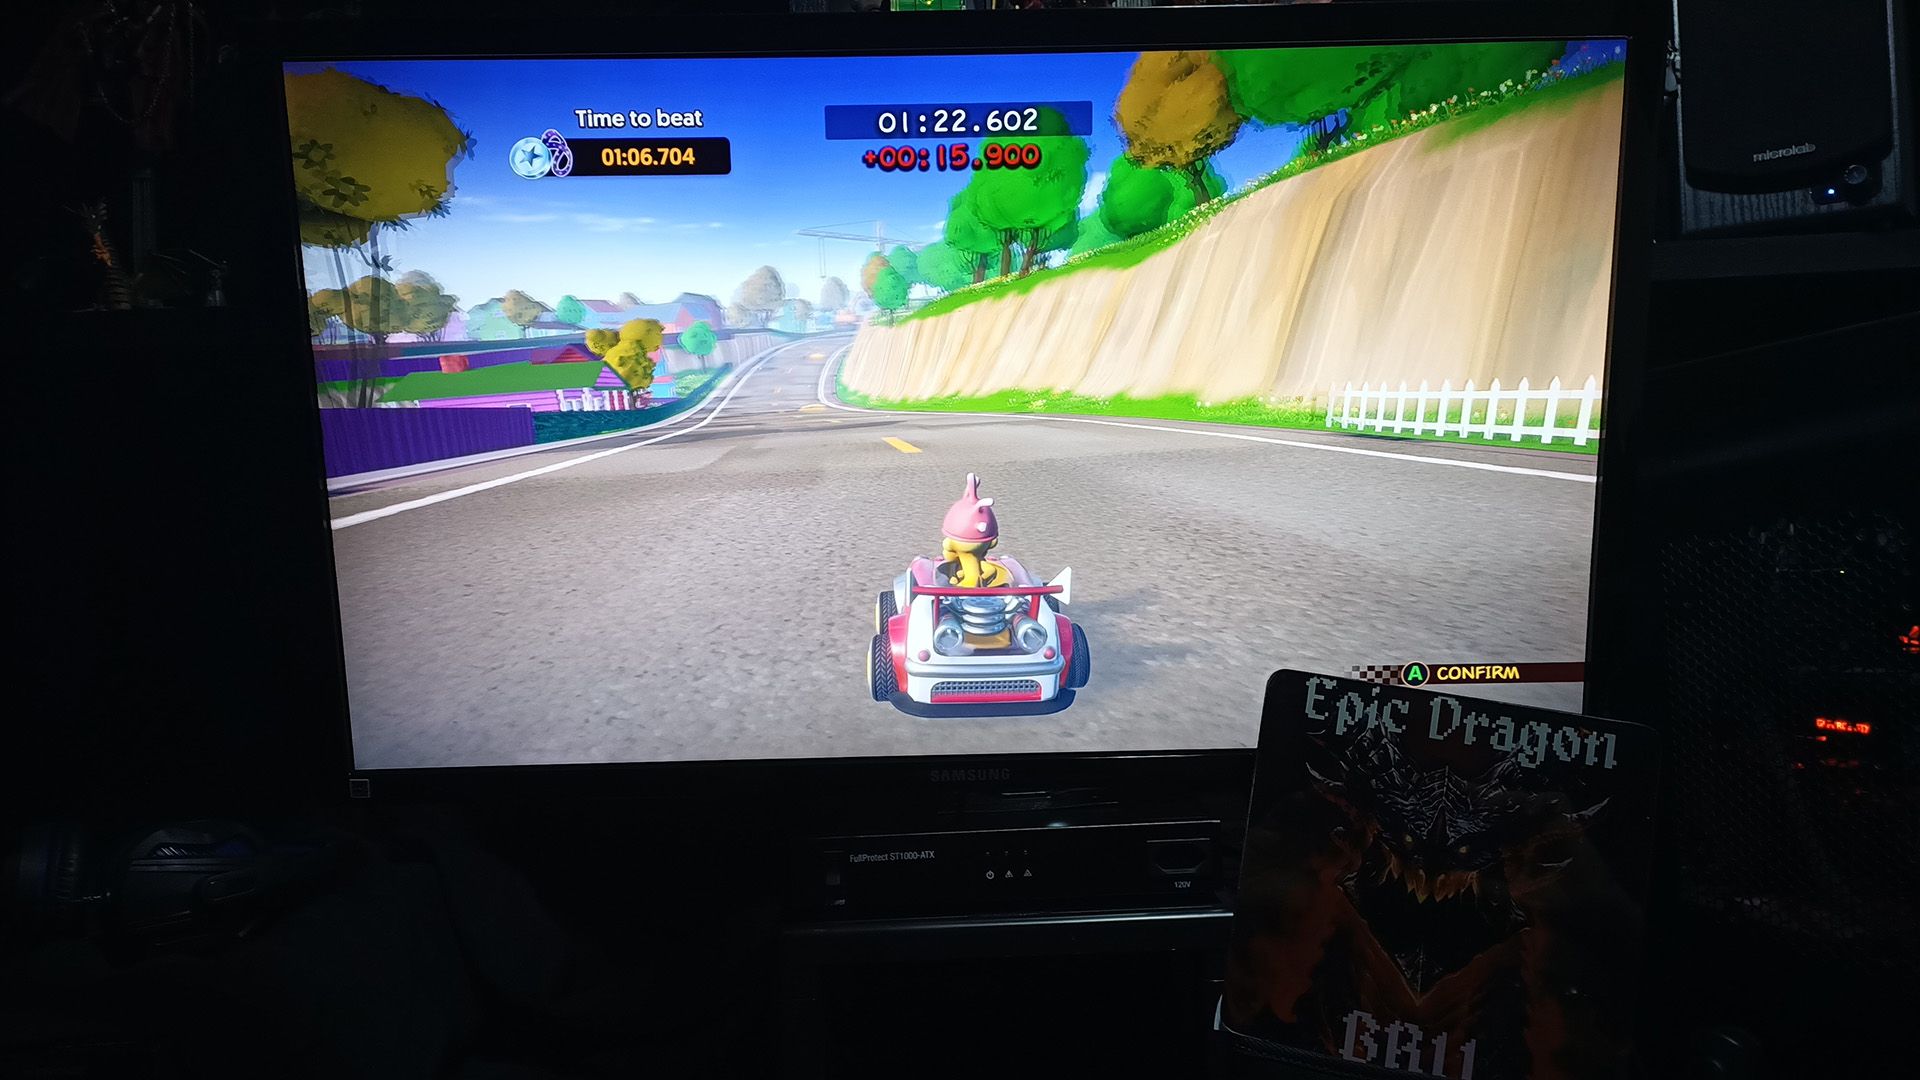 EpicDragon: Garfield Kart Furious Racing: Catz In The Hood [Time Trial: 3 Laps] (PC) 0:01:22.602 points on 2022-08-05 17:26:49